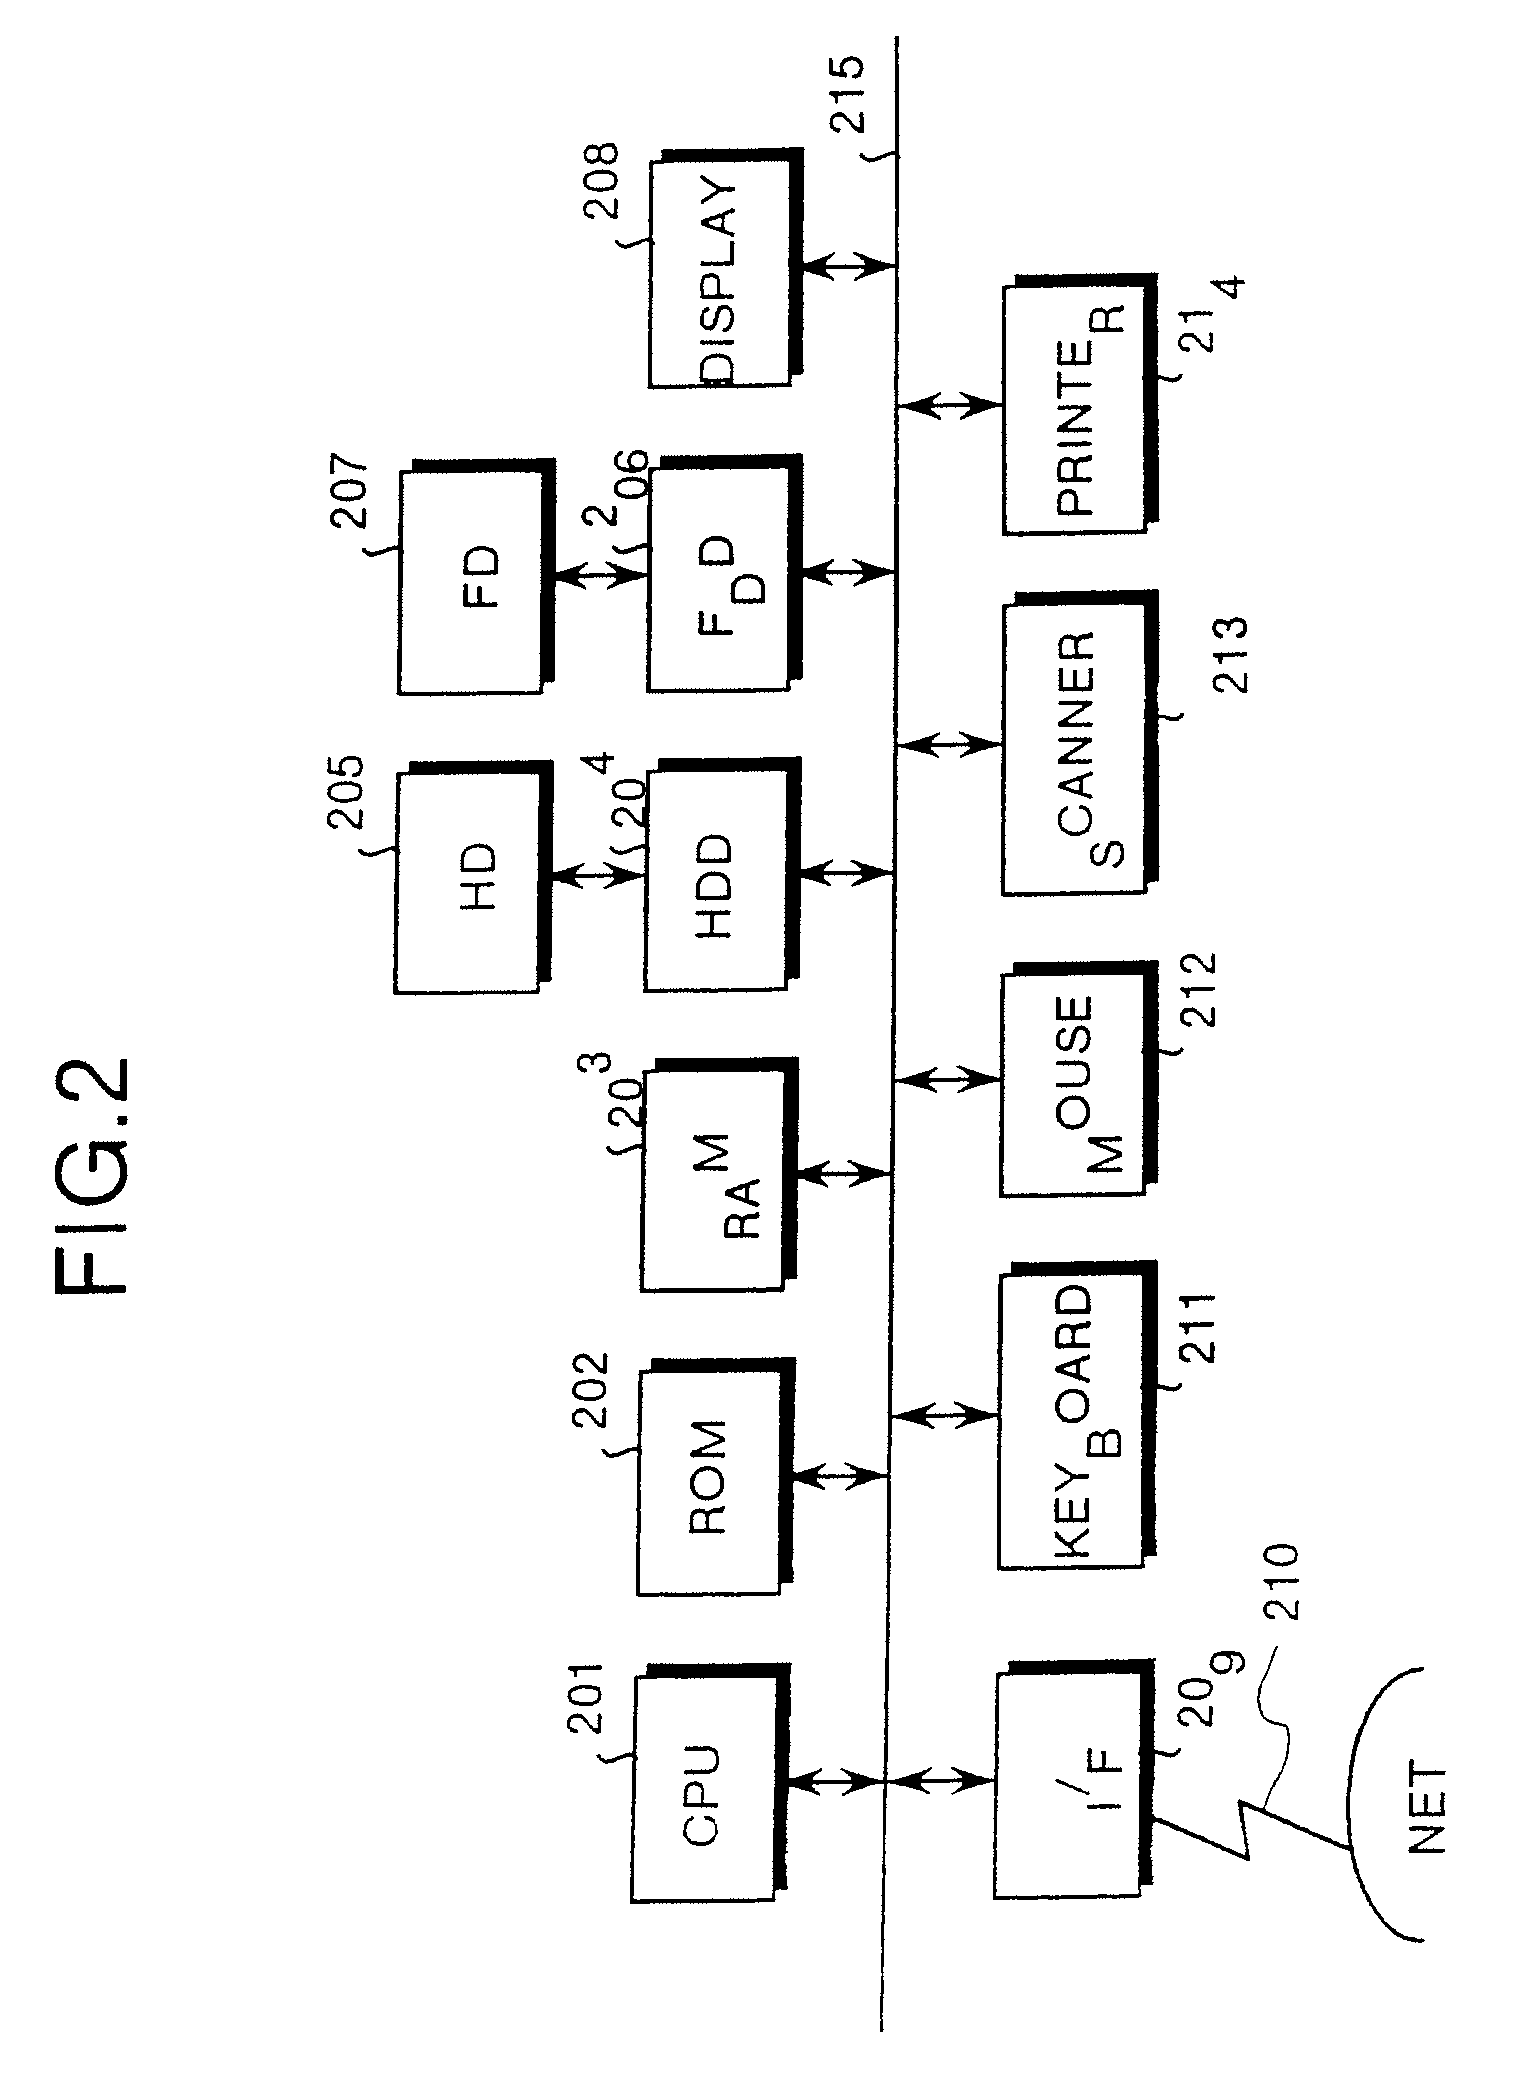 Image processing apparatus, image processing method, and a computer-readable storage medium containing a computer program for image processing recorded thereon